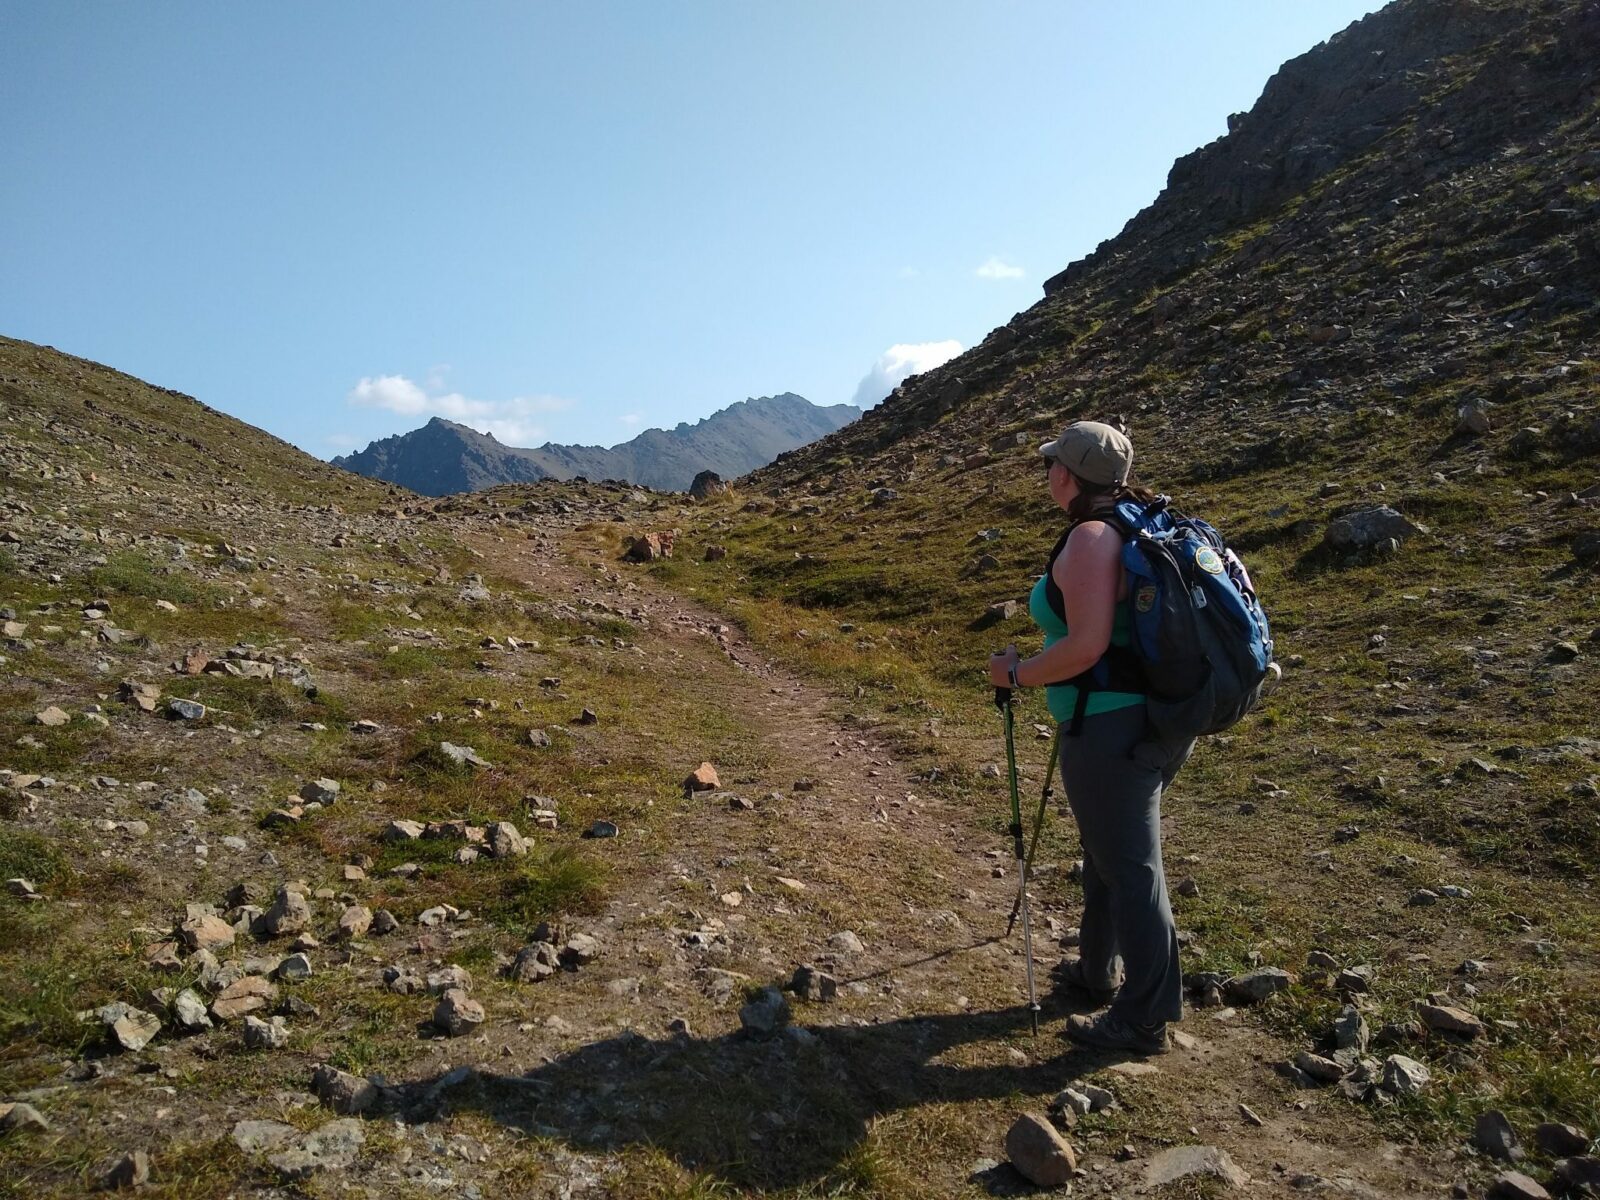 A woman stands on a trail looking at mountains in the distance. She has a blue backpack and is wearing a hat and sunglasses. She is using hiking poles and wearing gray long pants and a light green tank top